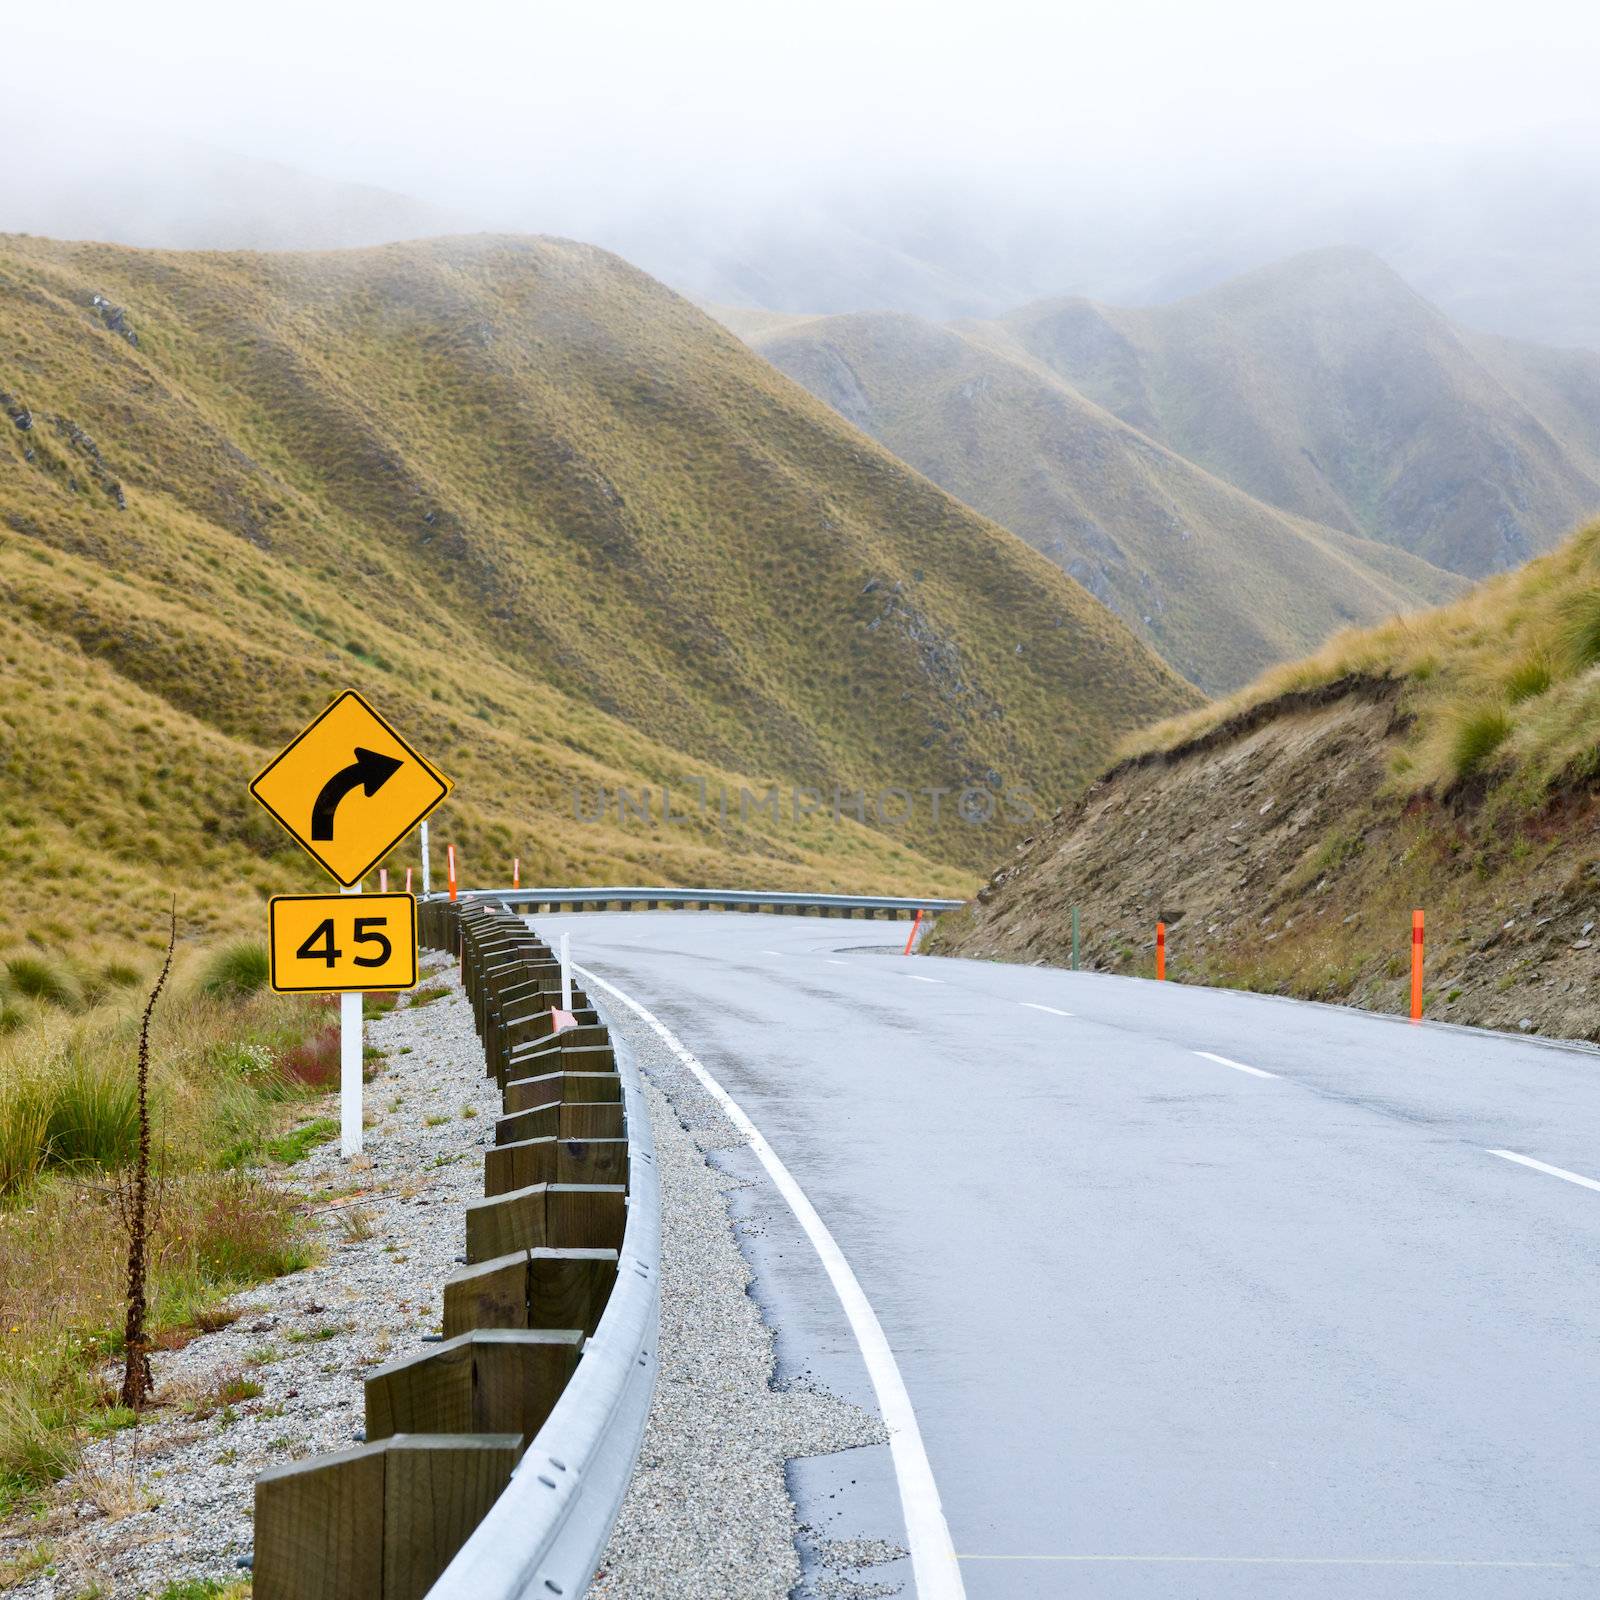 Mountain road in the Southern Alps of New Zealand on a foggy day